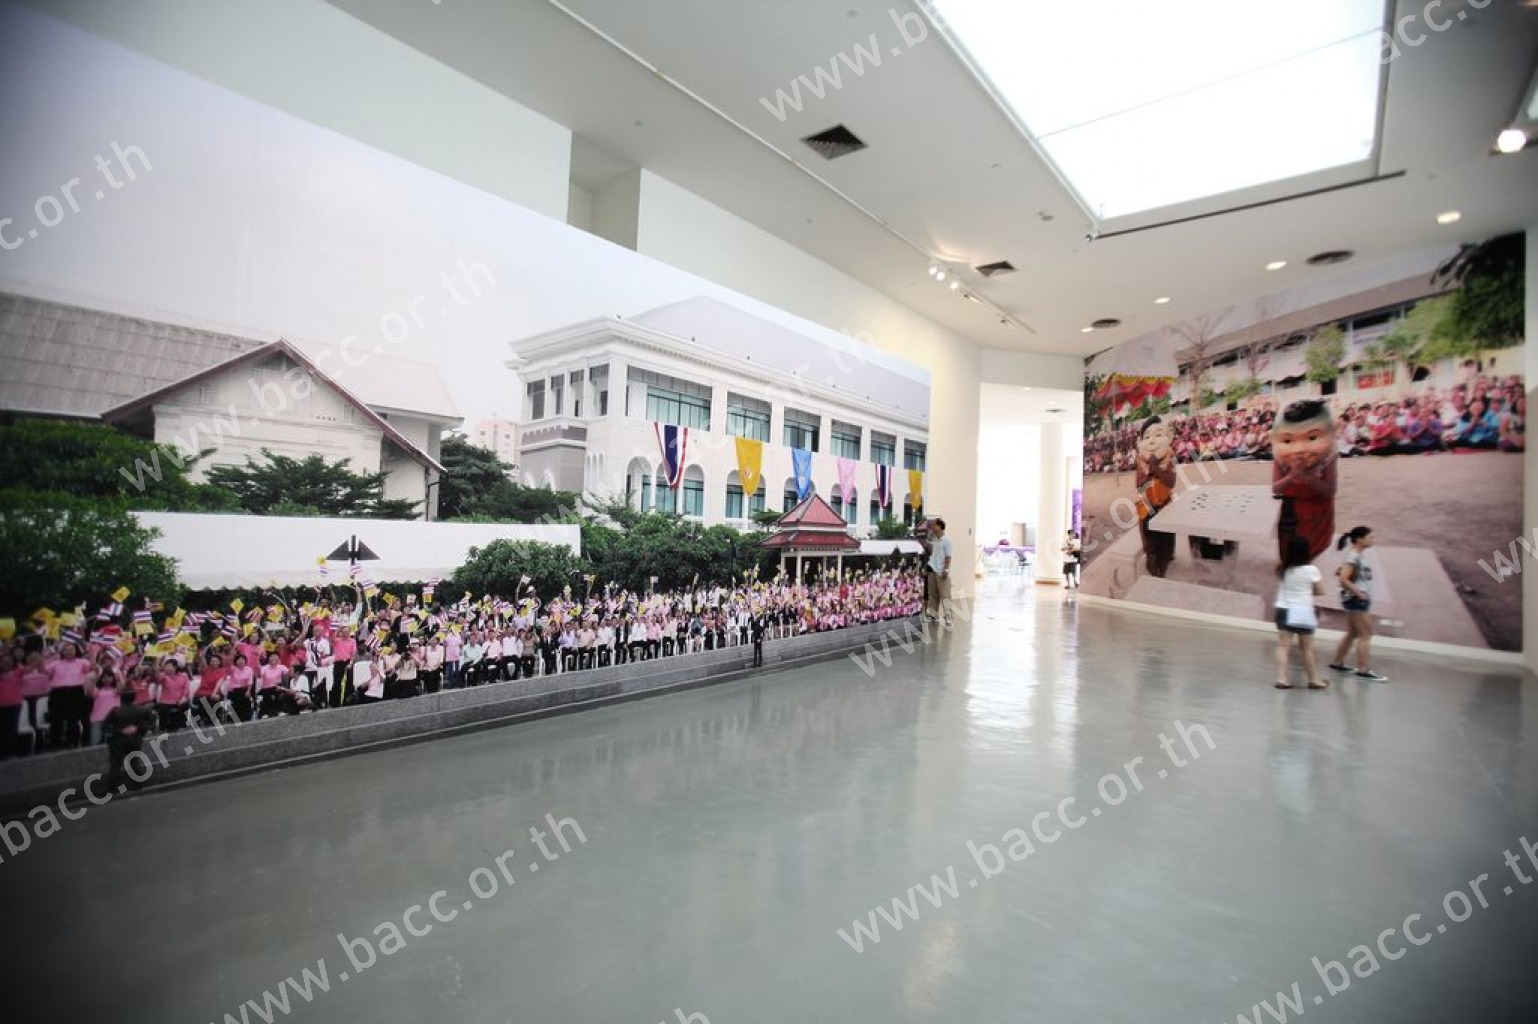 Photographs Exhibition by H.R.H. Princess Maha Chakri Sirindhorn “Camera in Motion: a Global Perspective”